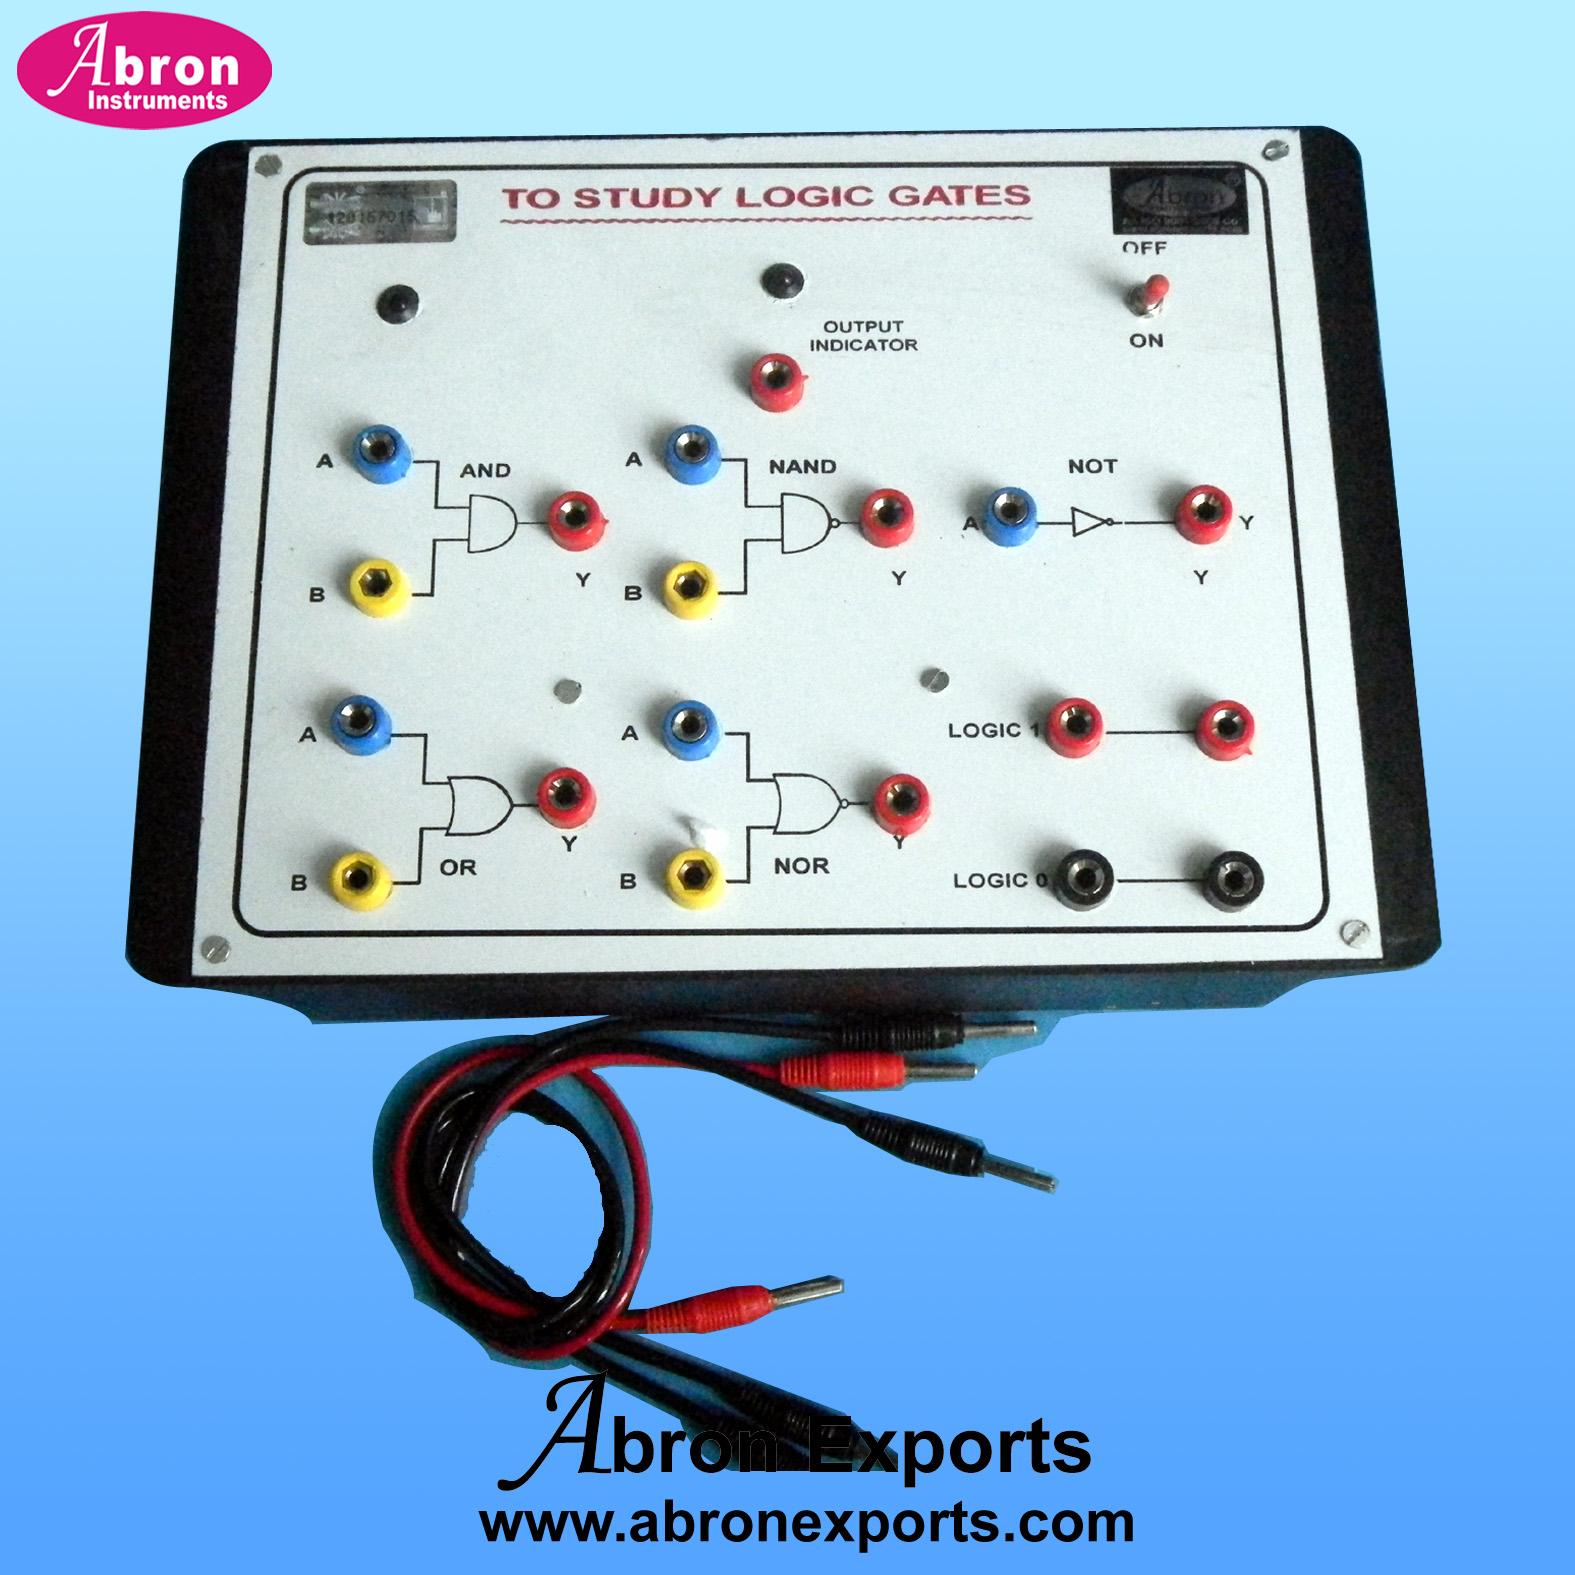 Logic Gate 5 gates AND NAND OR NOR NOT LED 0-1 sockets power supply AE-1300A